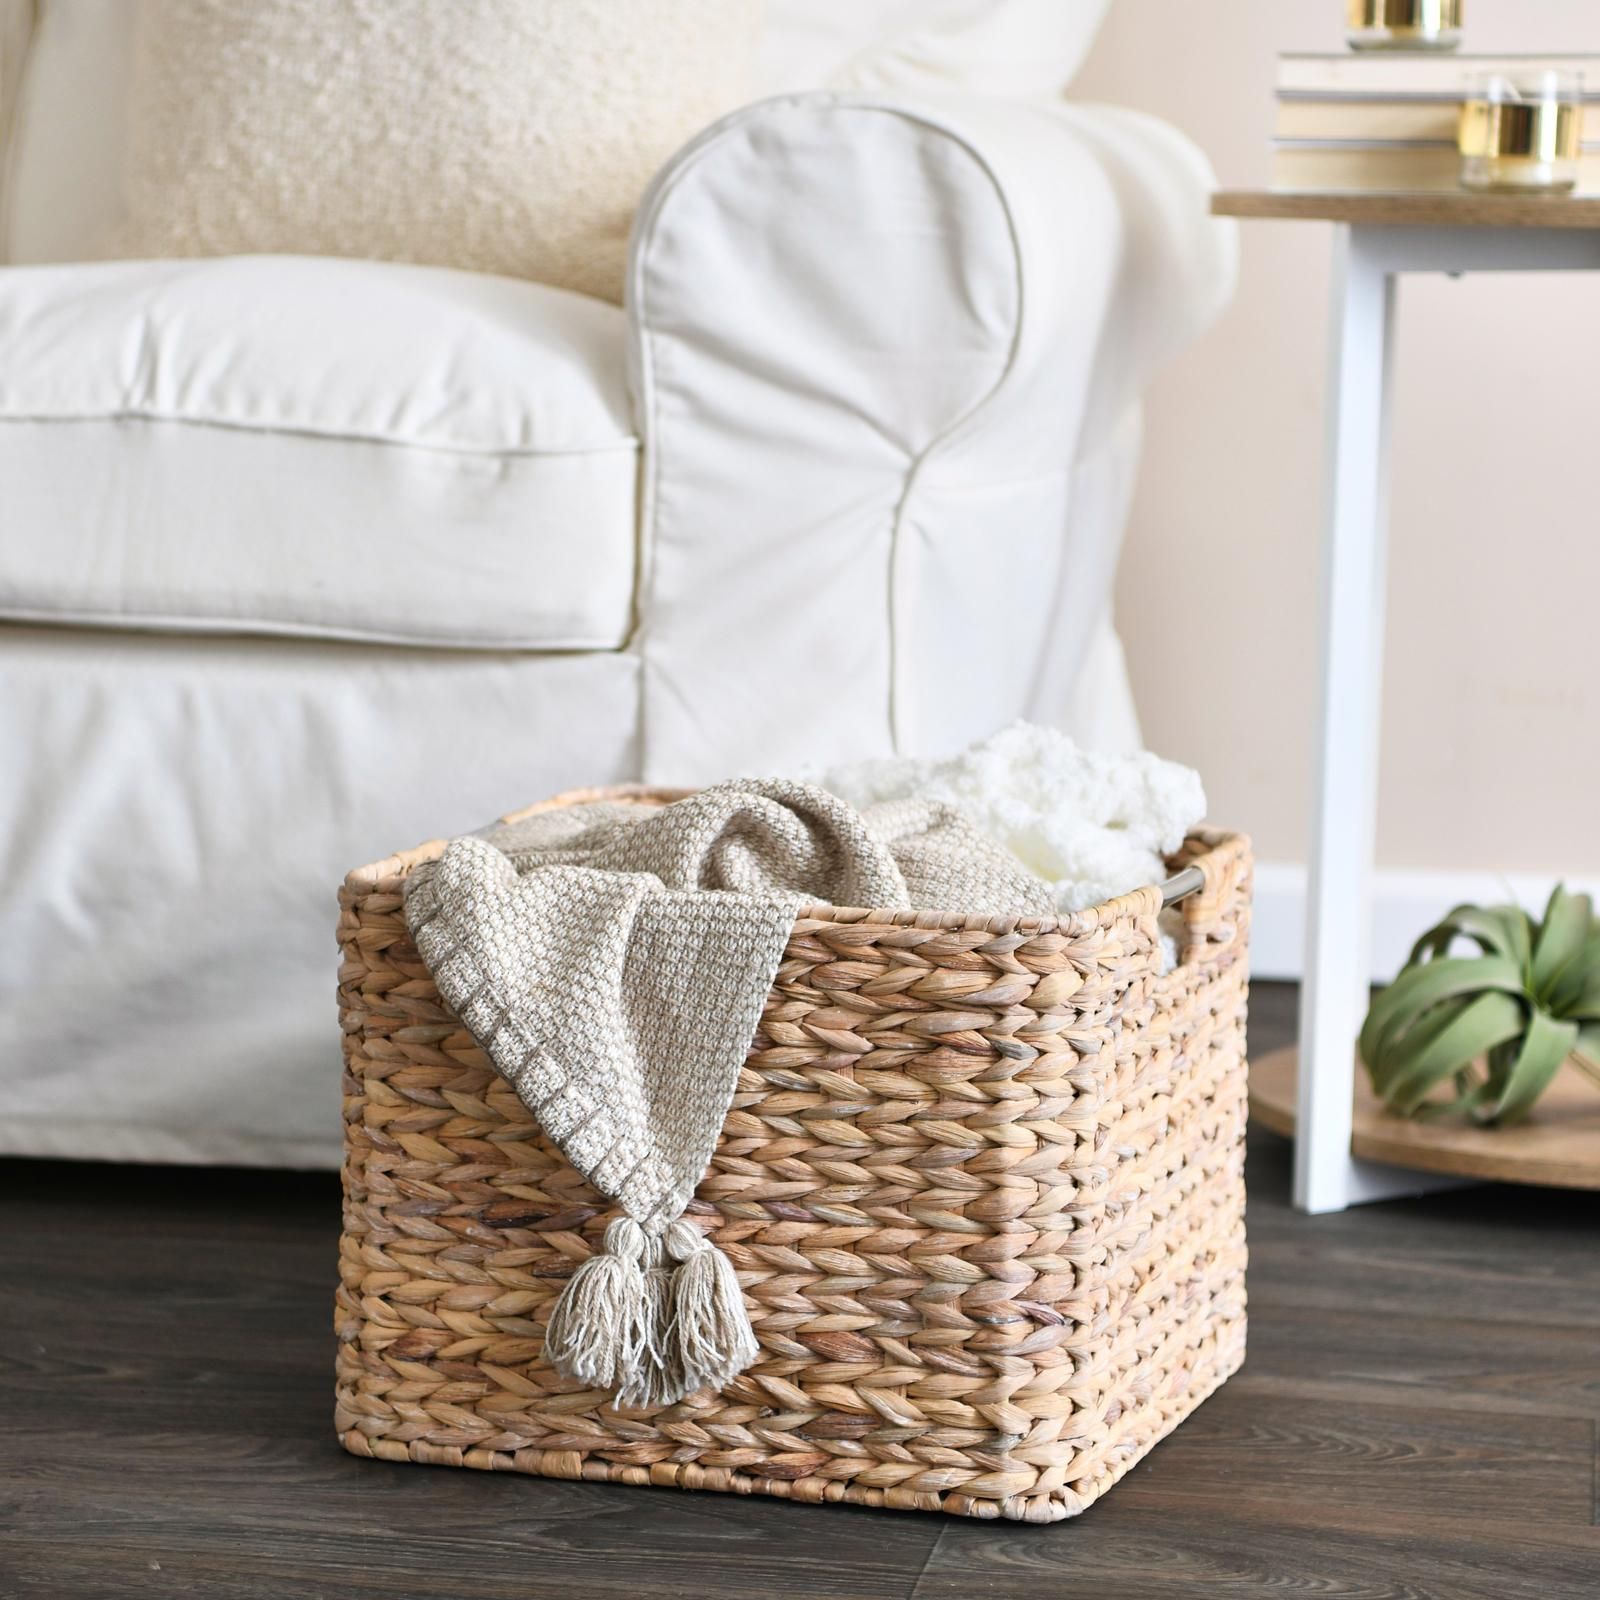 Effortlessly Chic: Upgrade Your Laundry Room with Wicker Laundry Baskets with Handles